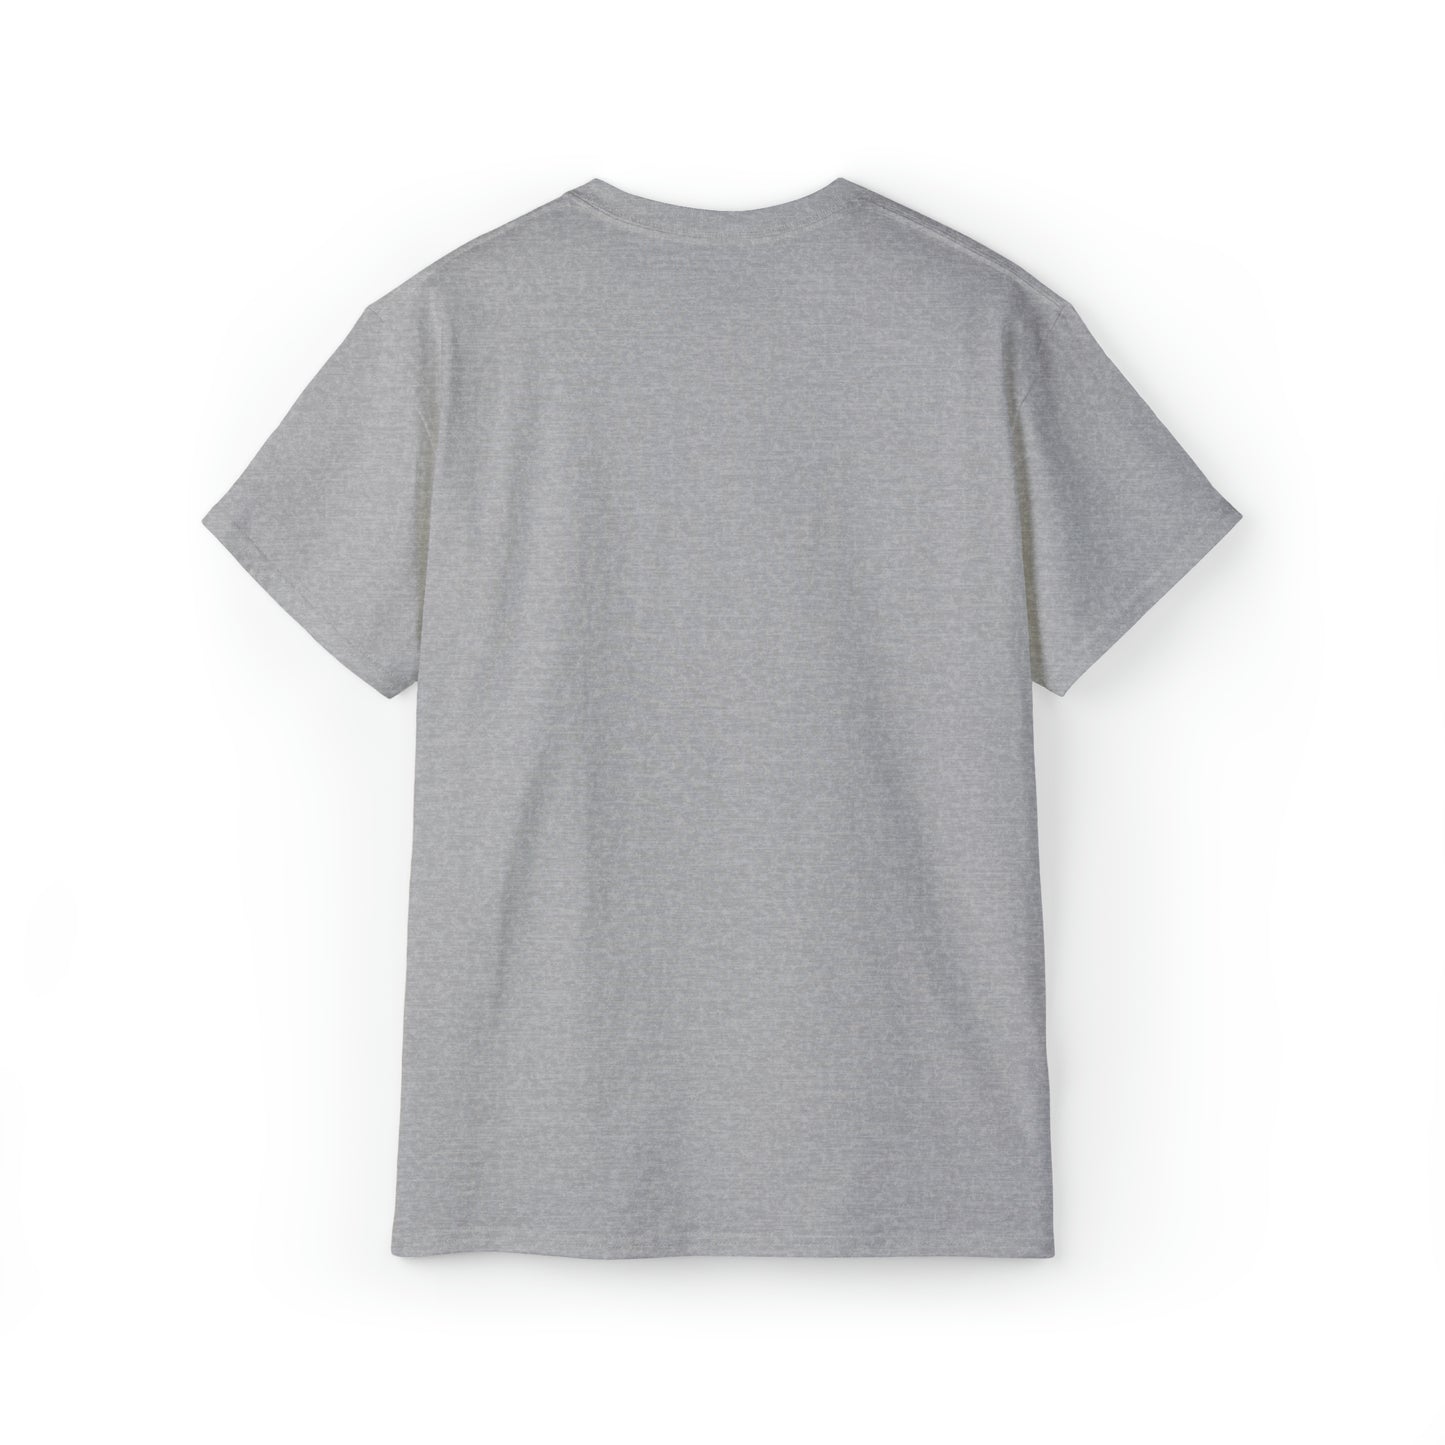 Unisex Ultra Cotton Tee, Lounges nuits, grey